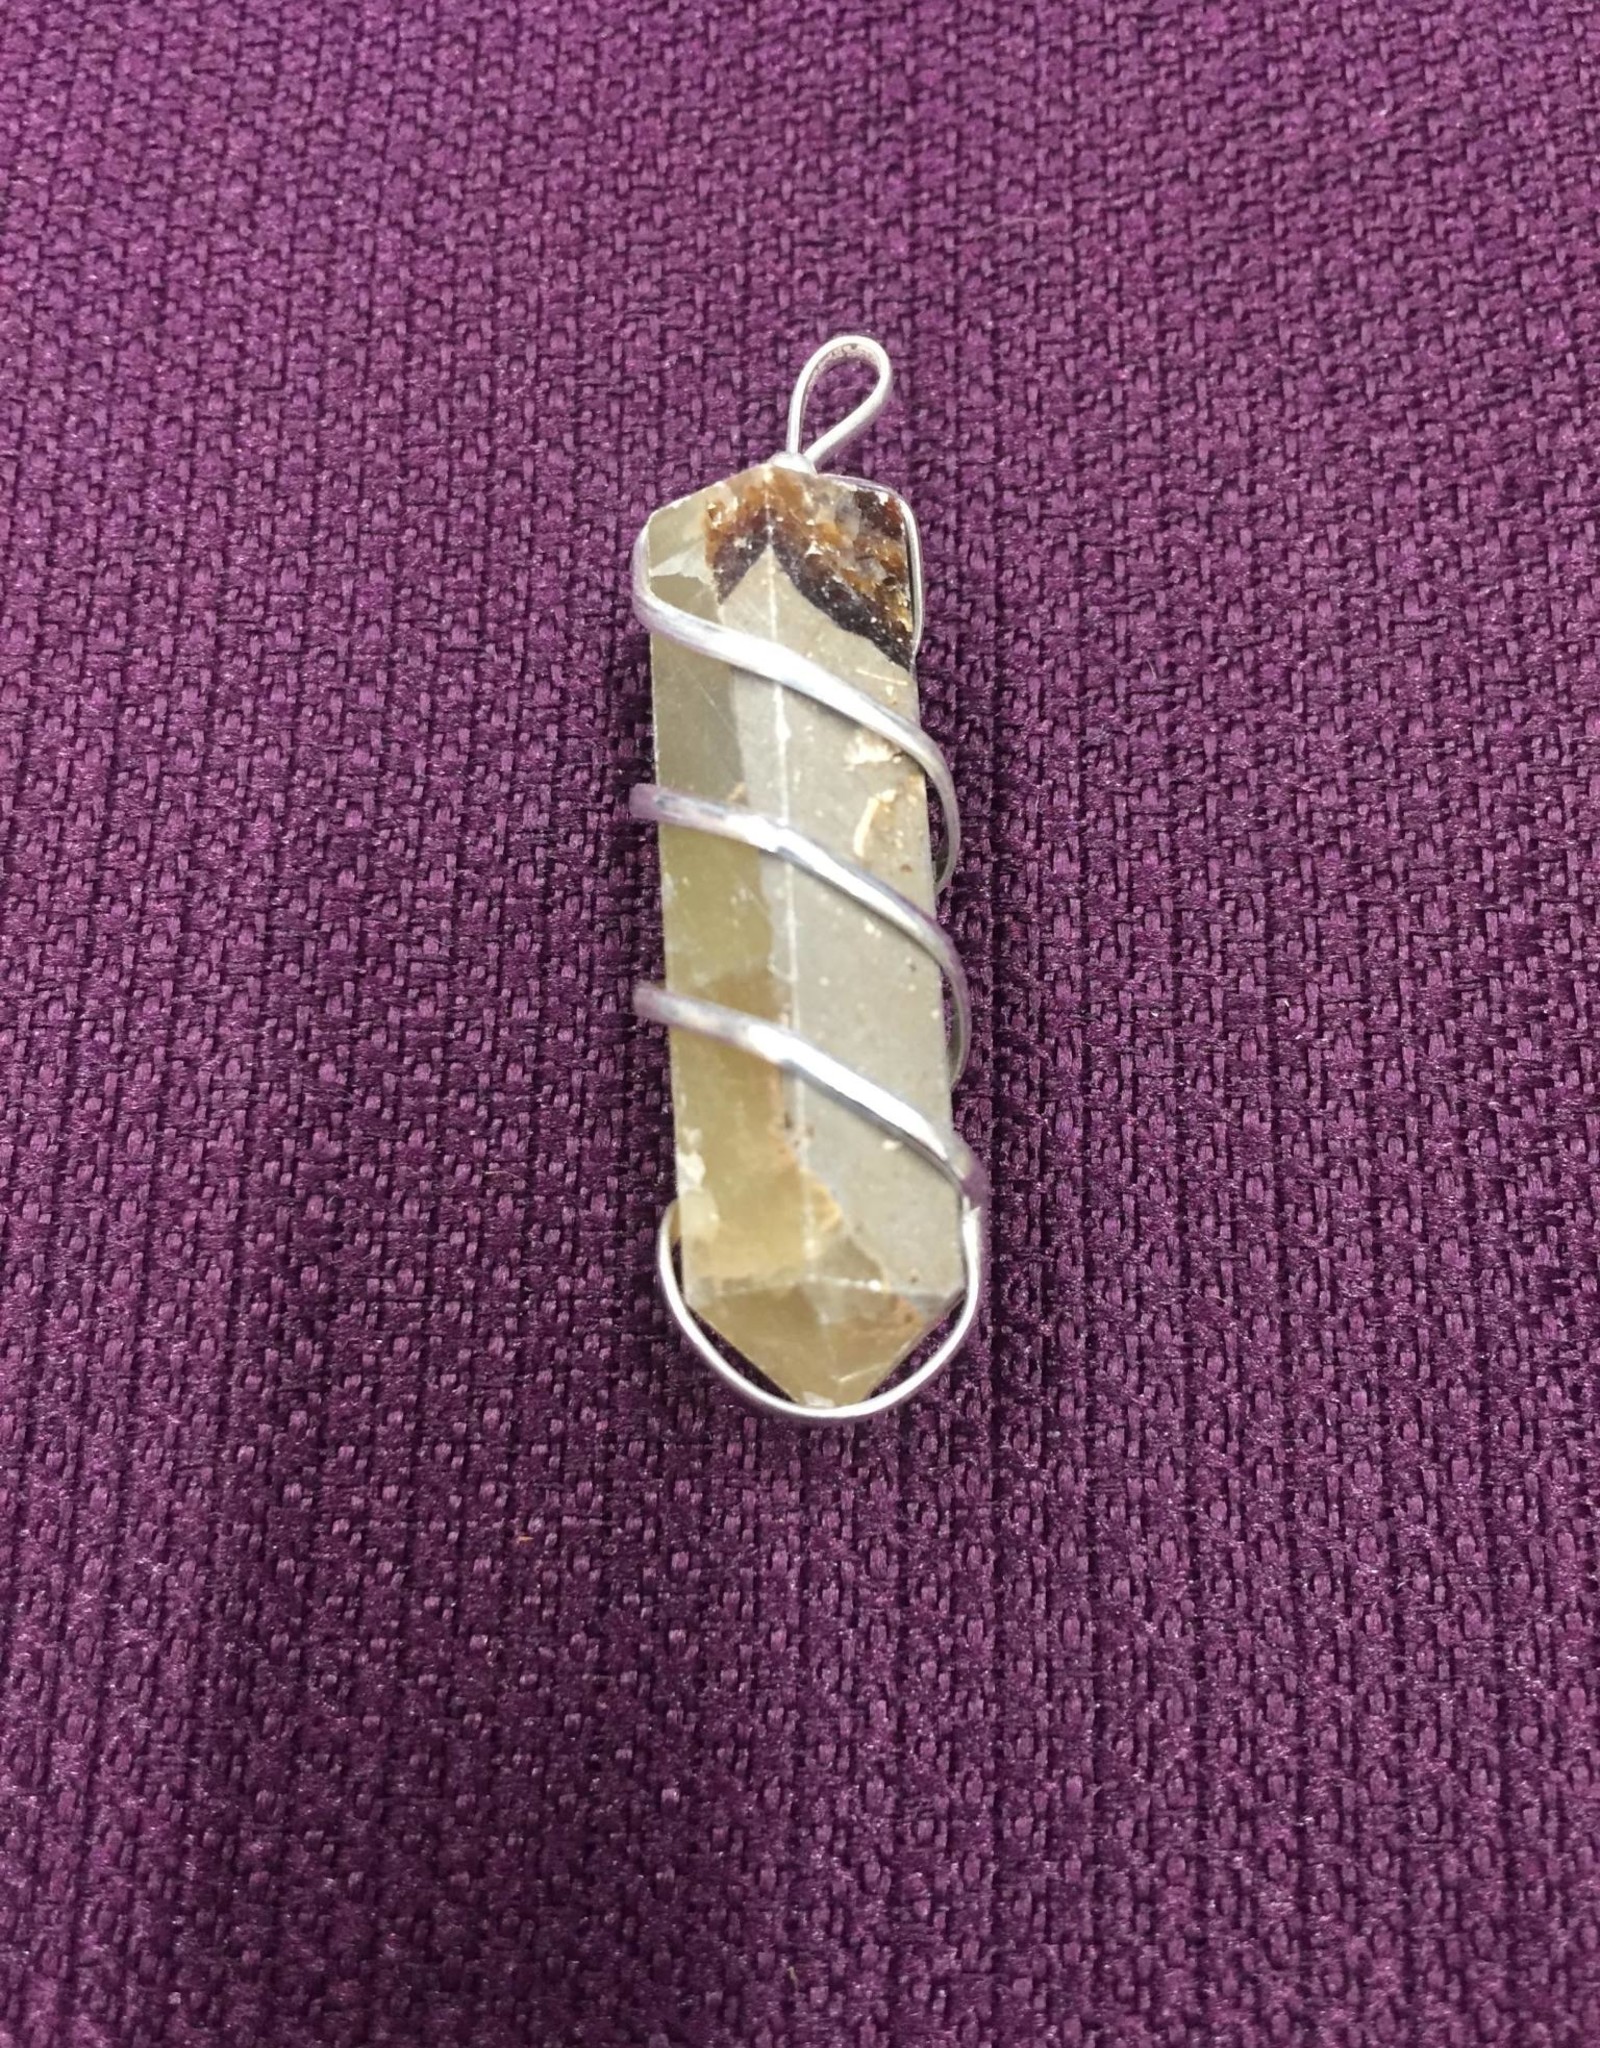 Septarian Spiral Wrapped Pendant